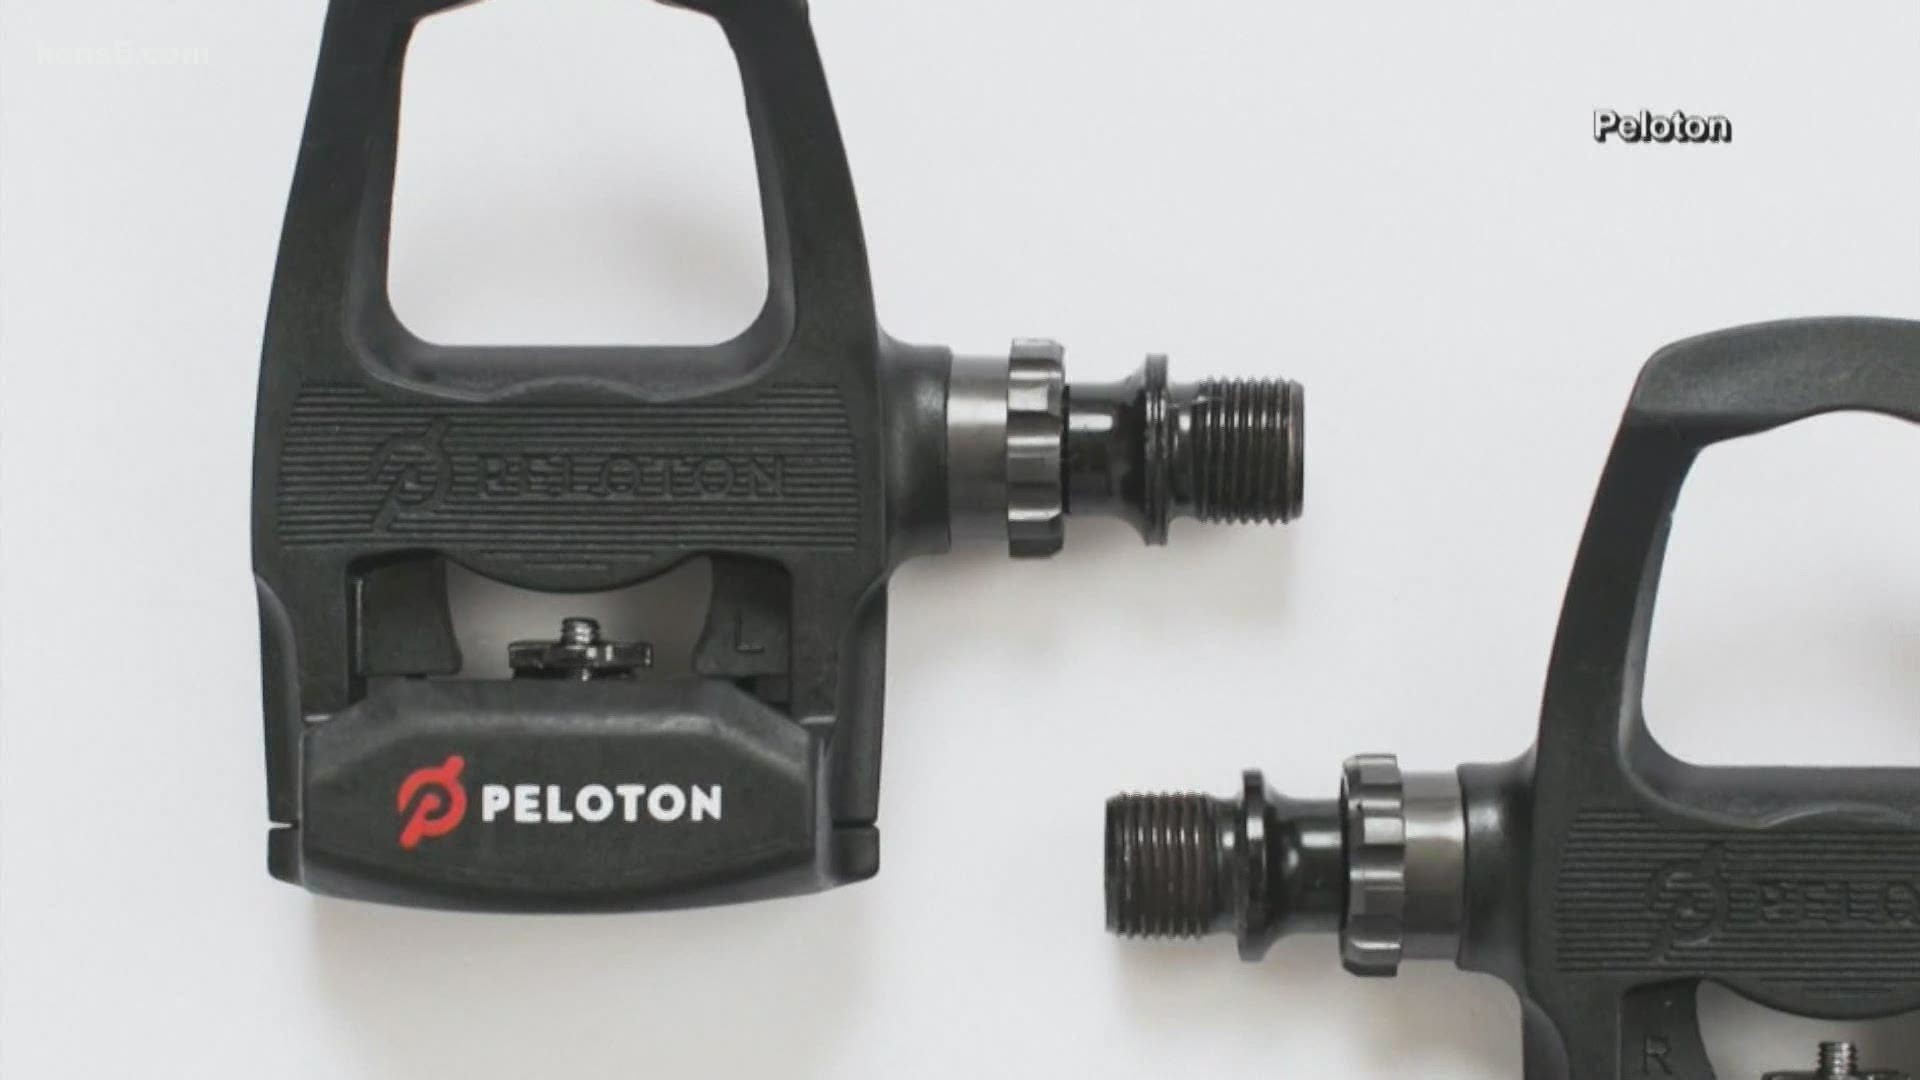 The fitness brand says there is a defect that causes the pedals to break off the axle.